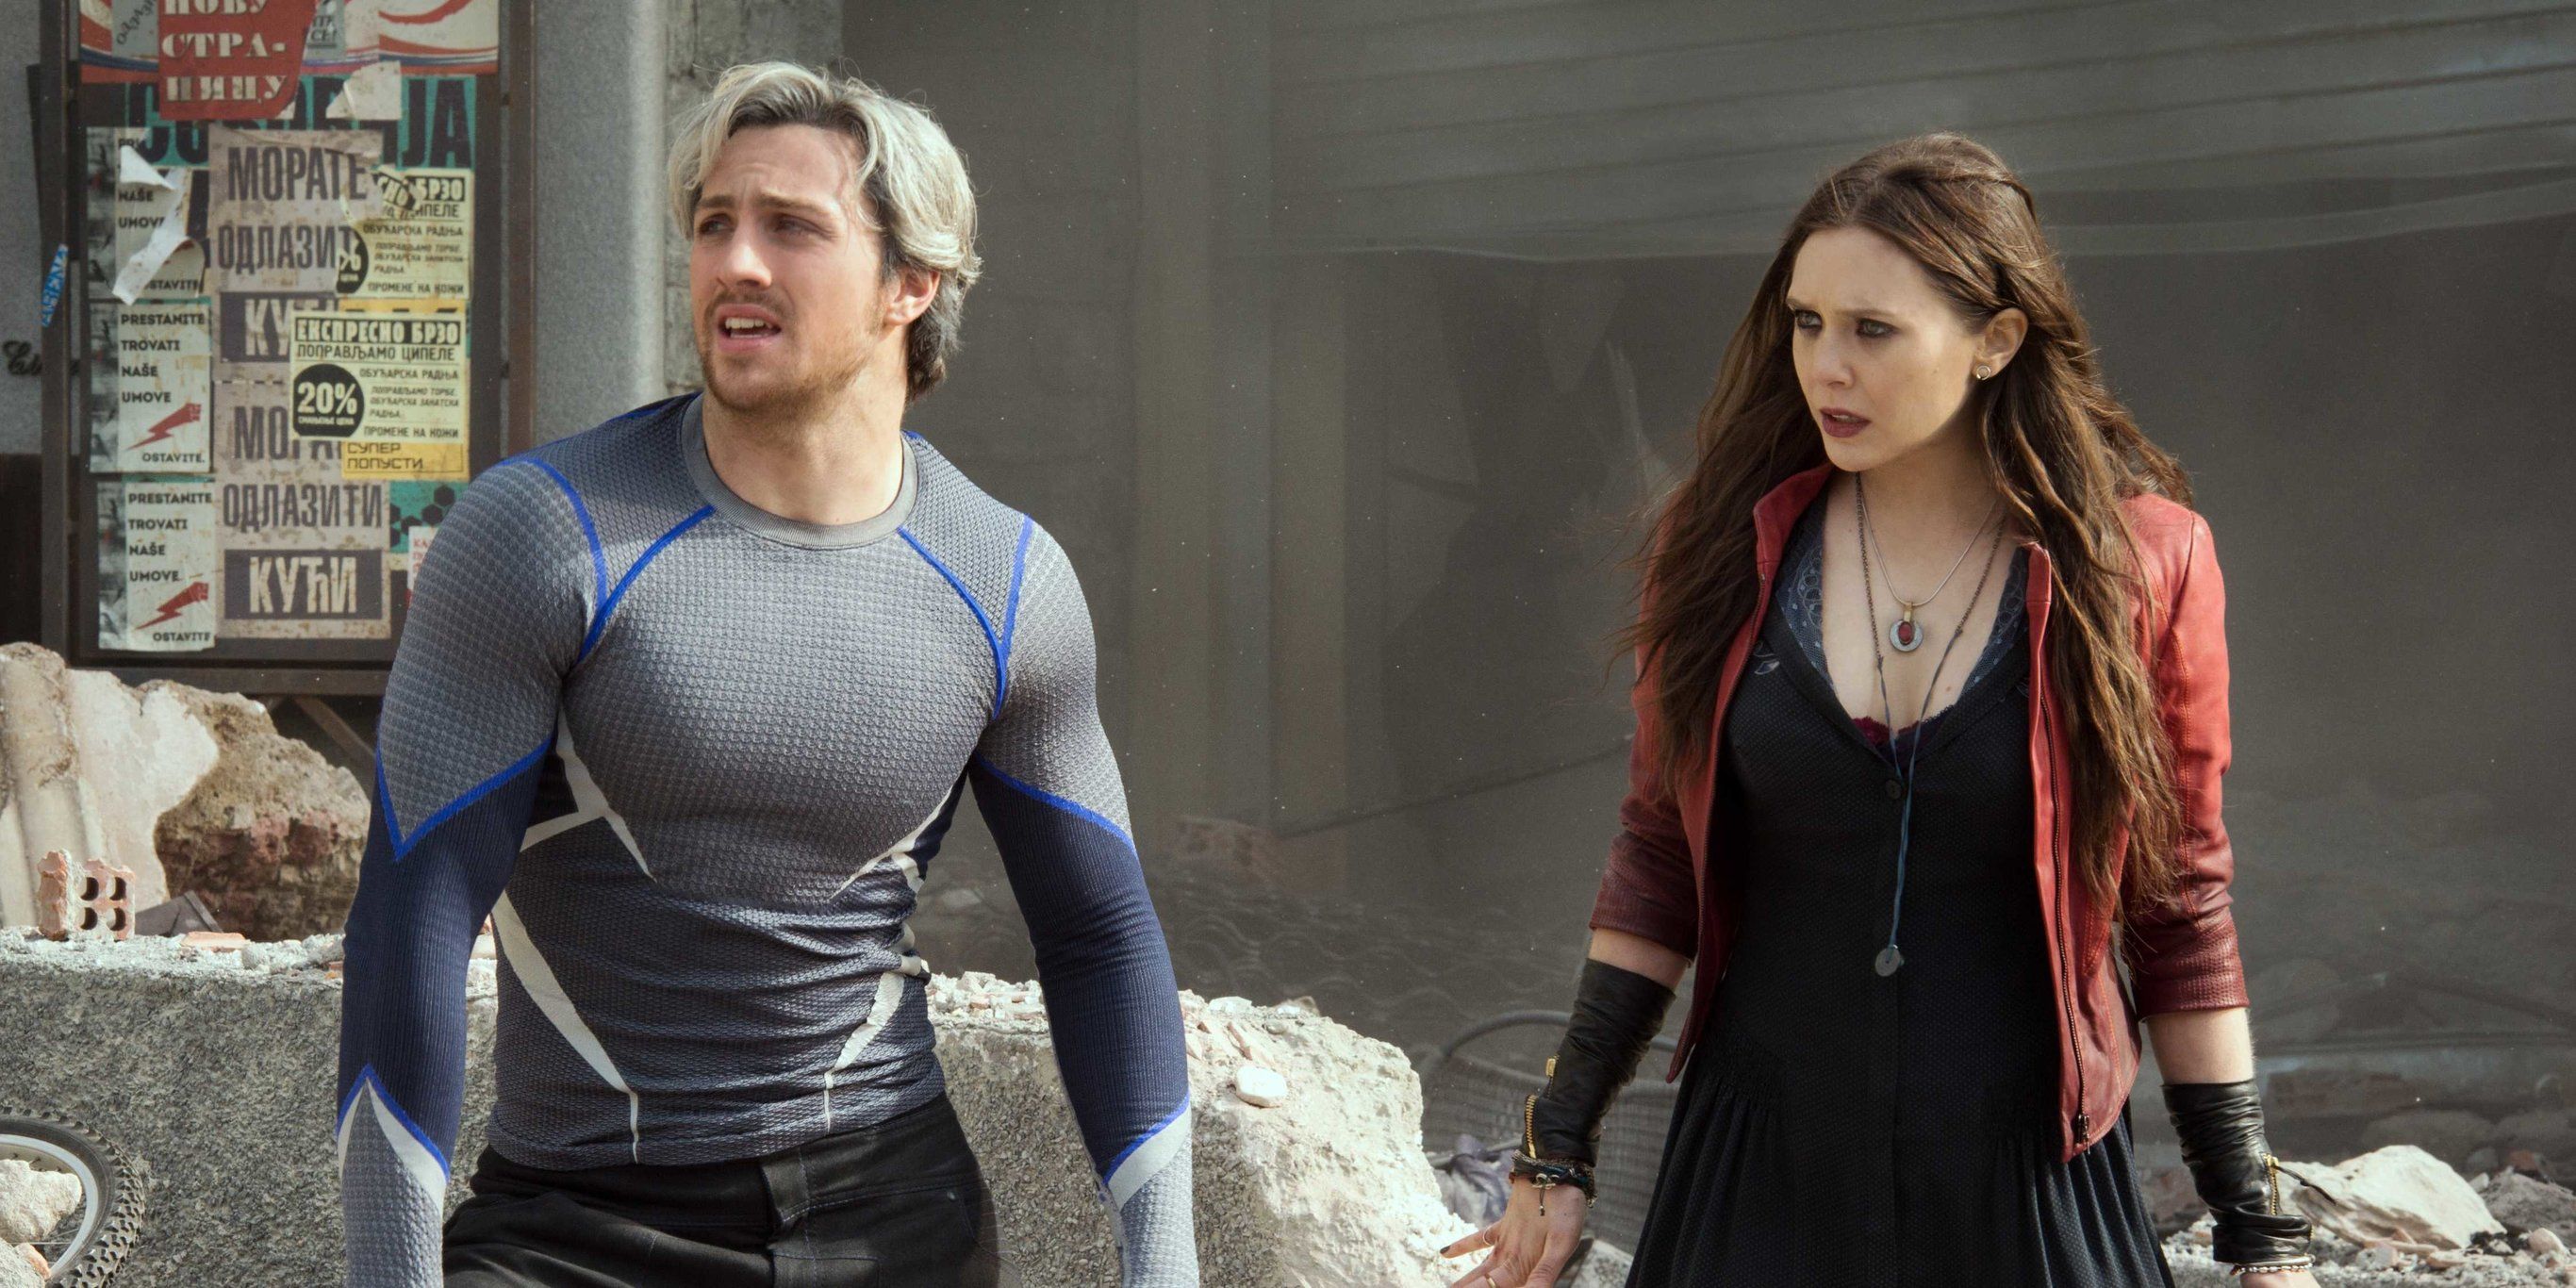 Pietro and Wanda standing in Avengers: Age of Ultron.